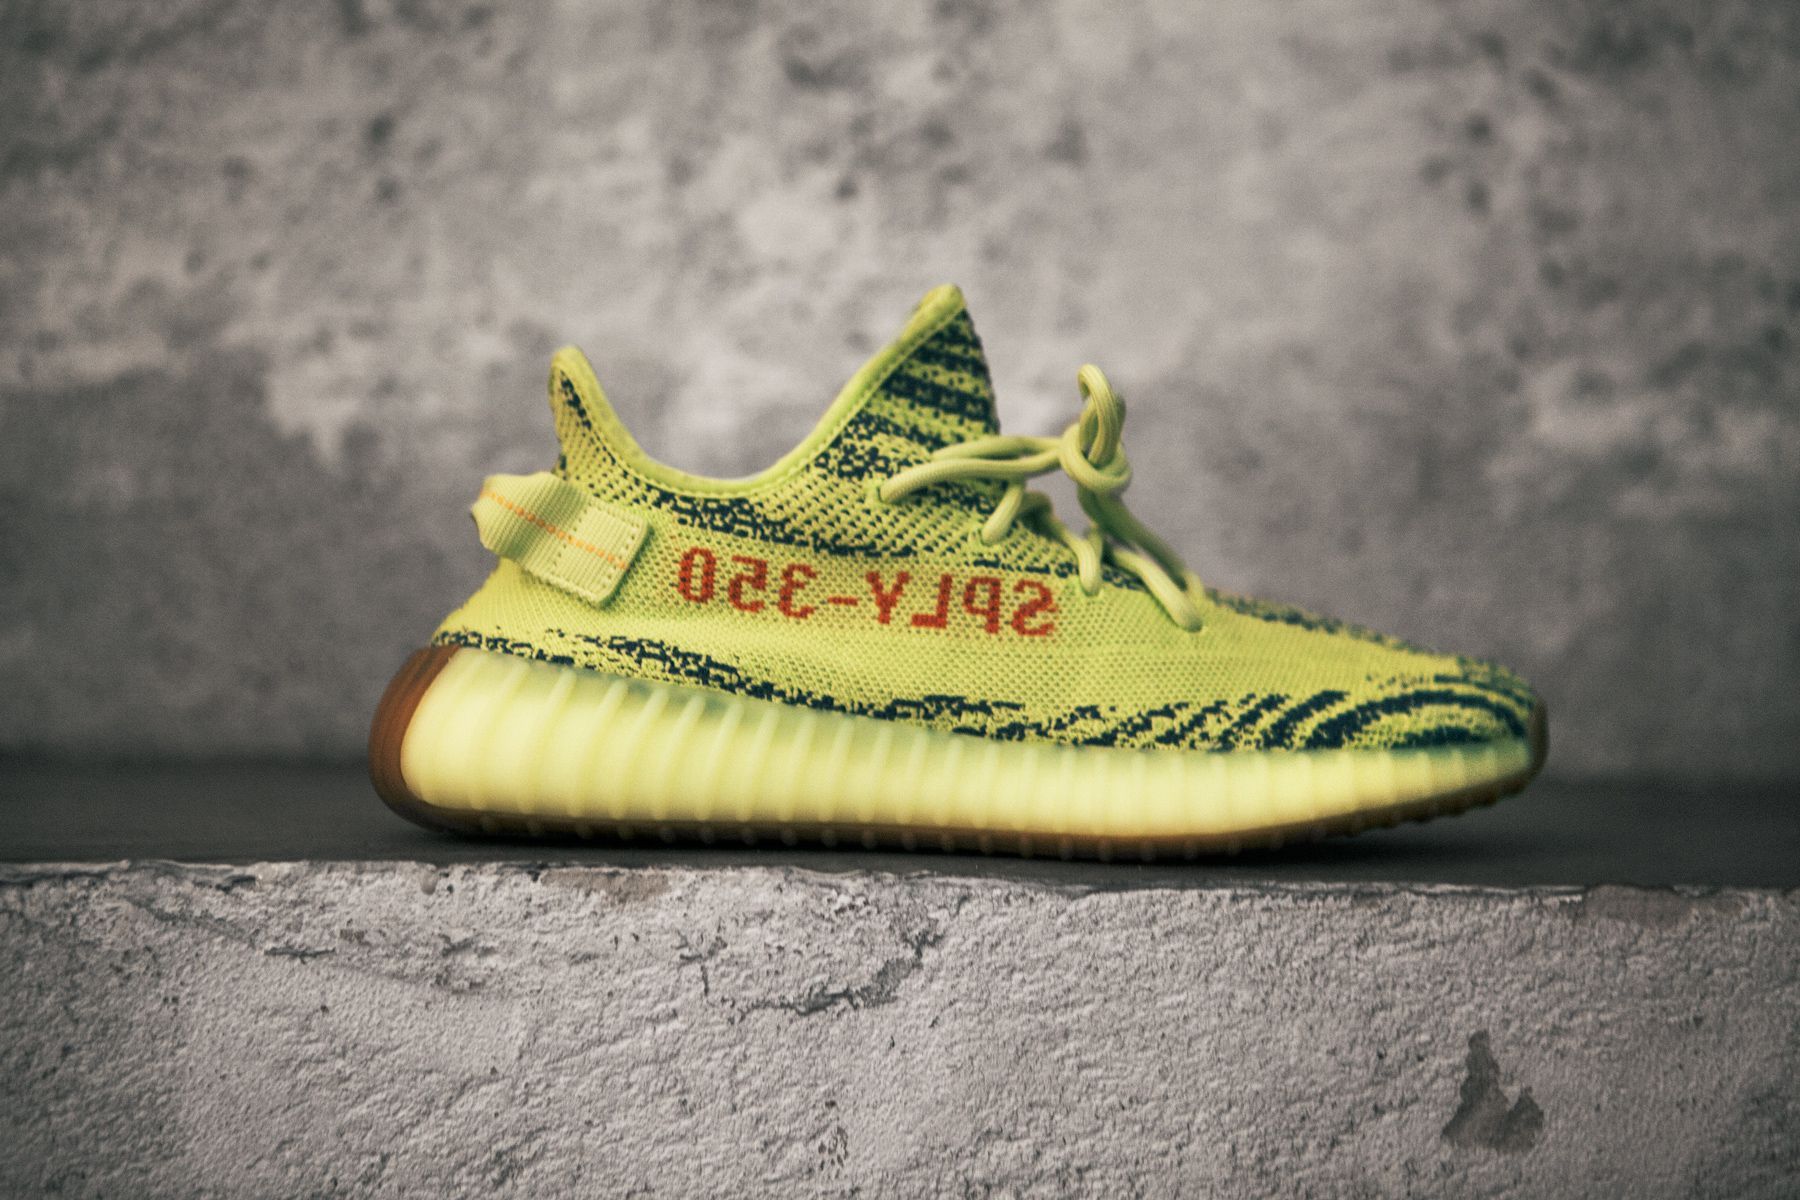 Have a look at the YEEZY Boost 350 V2 Yellow" in